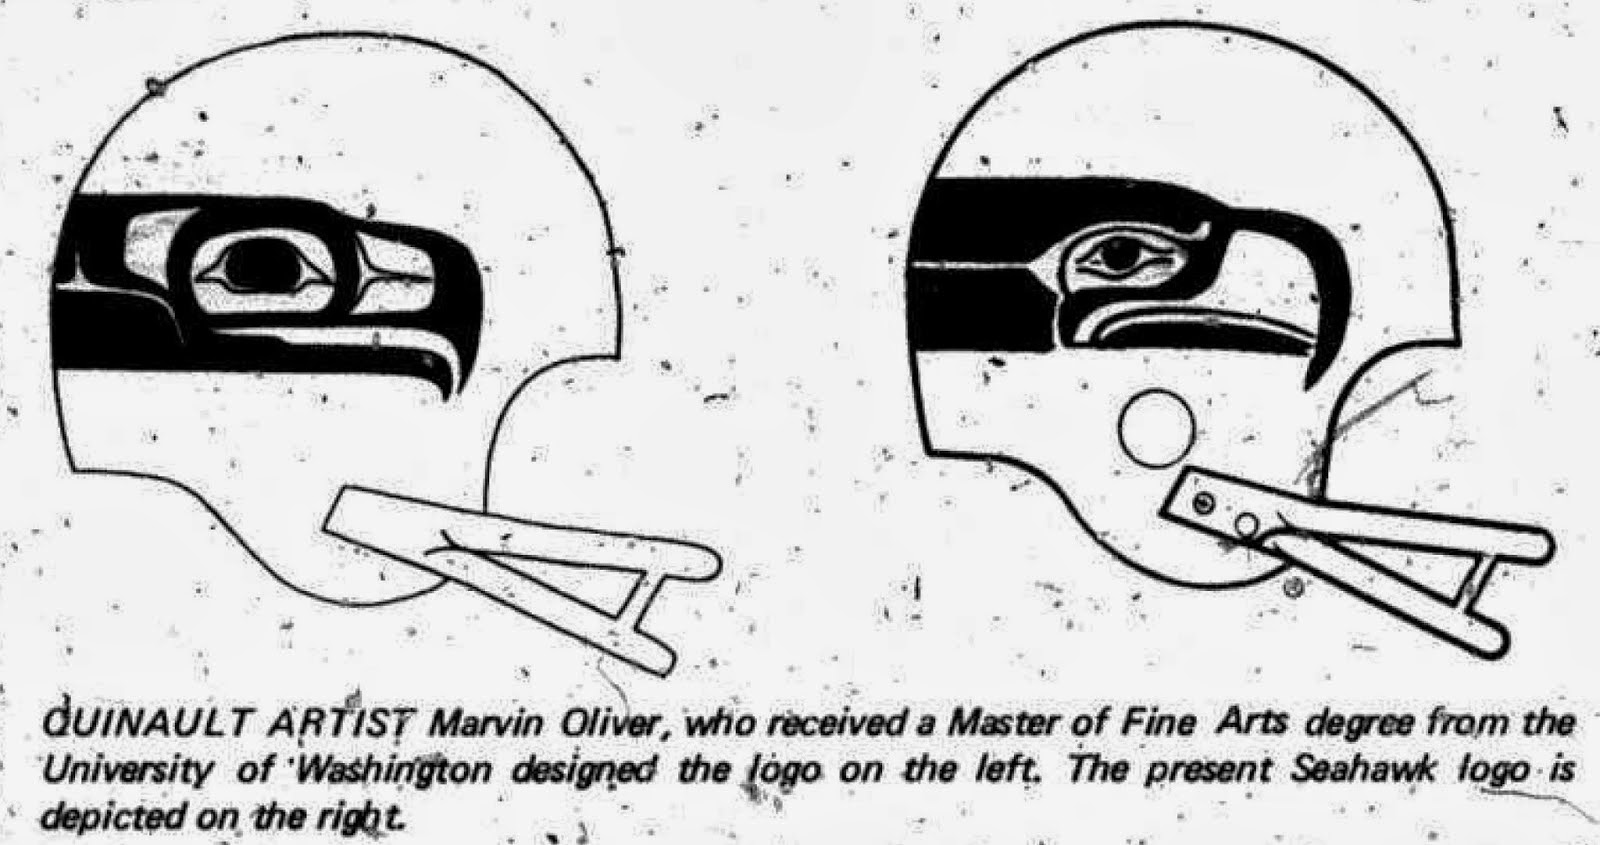 Burke Blog: Introducing the mask that inspired the Seattle 